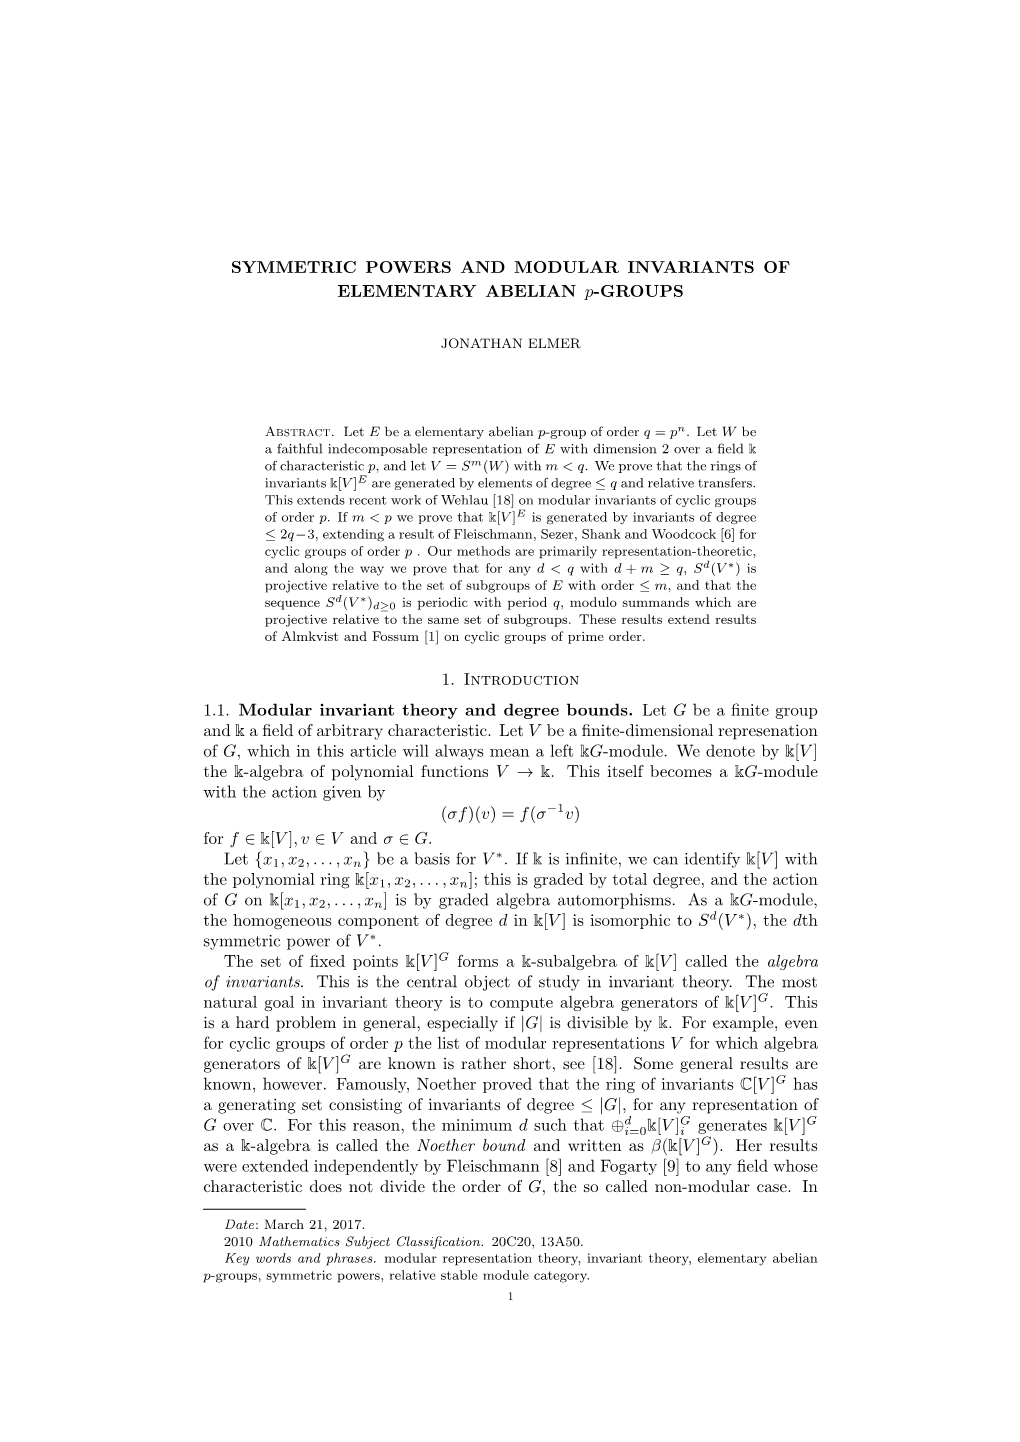 SYMMETRIC POWERS and MODULAR INVARIANTS of ELEMENTARY ABELIAN P-GROUPS